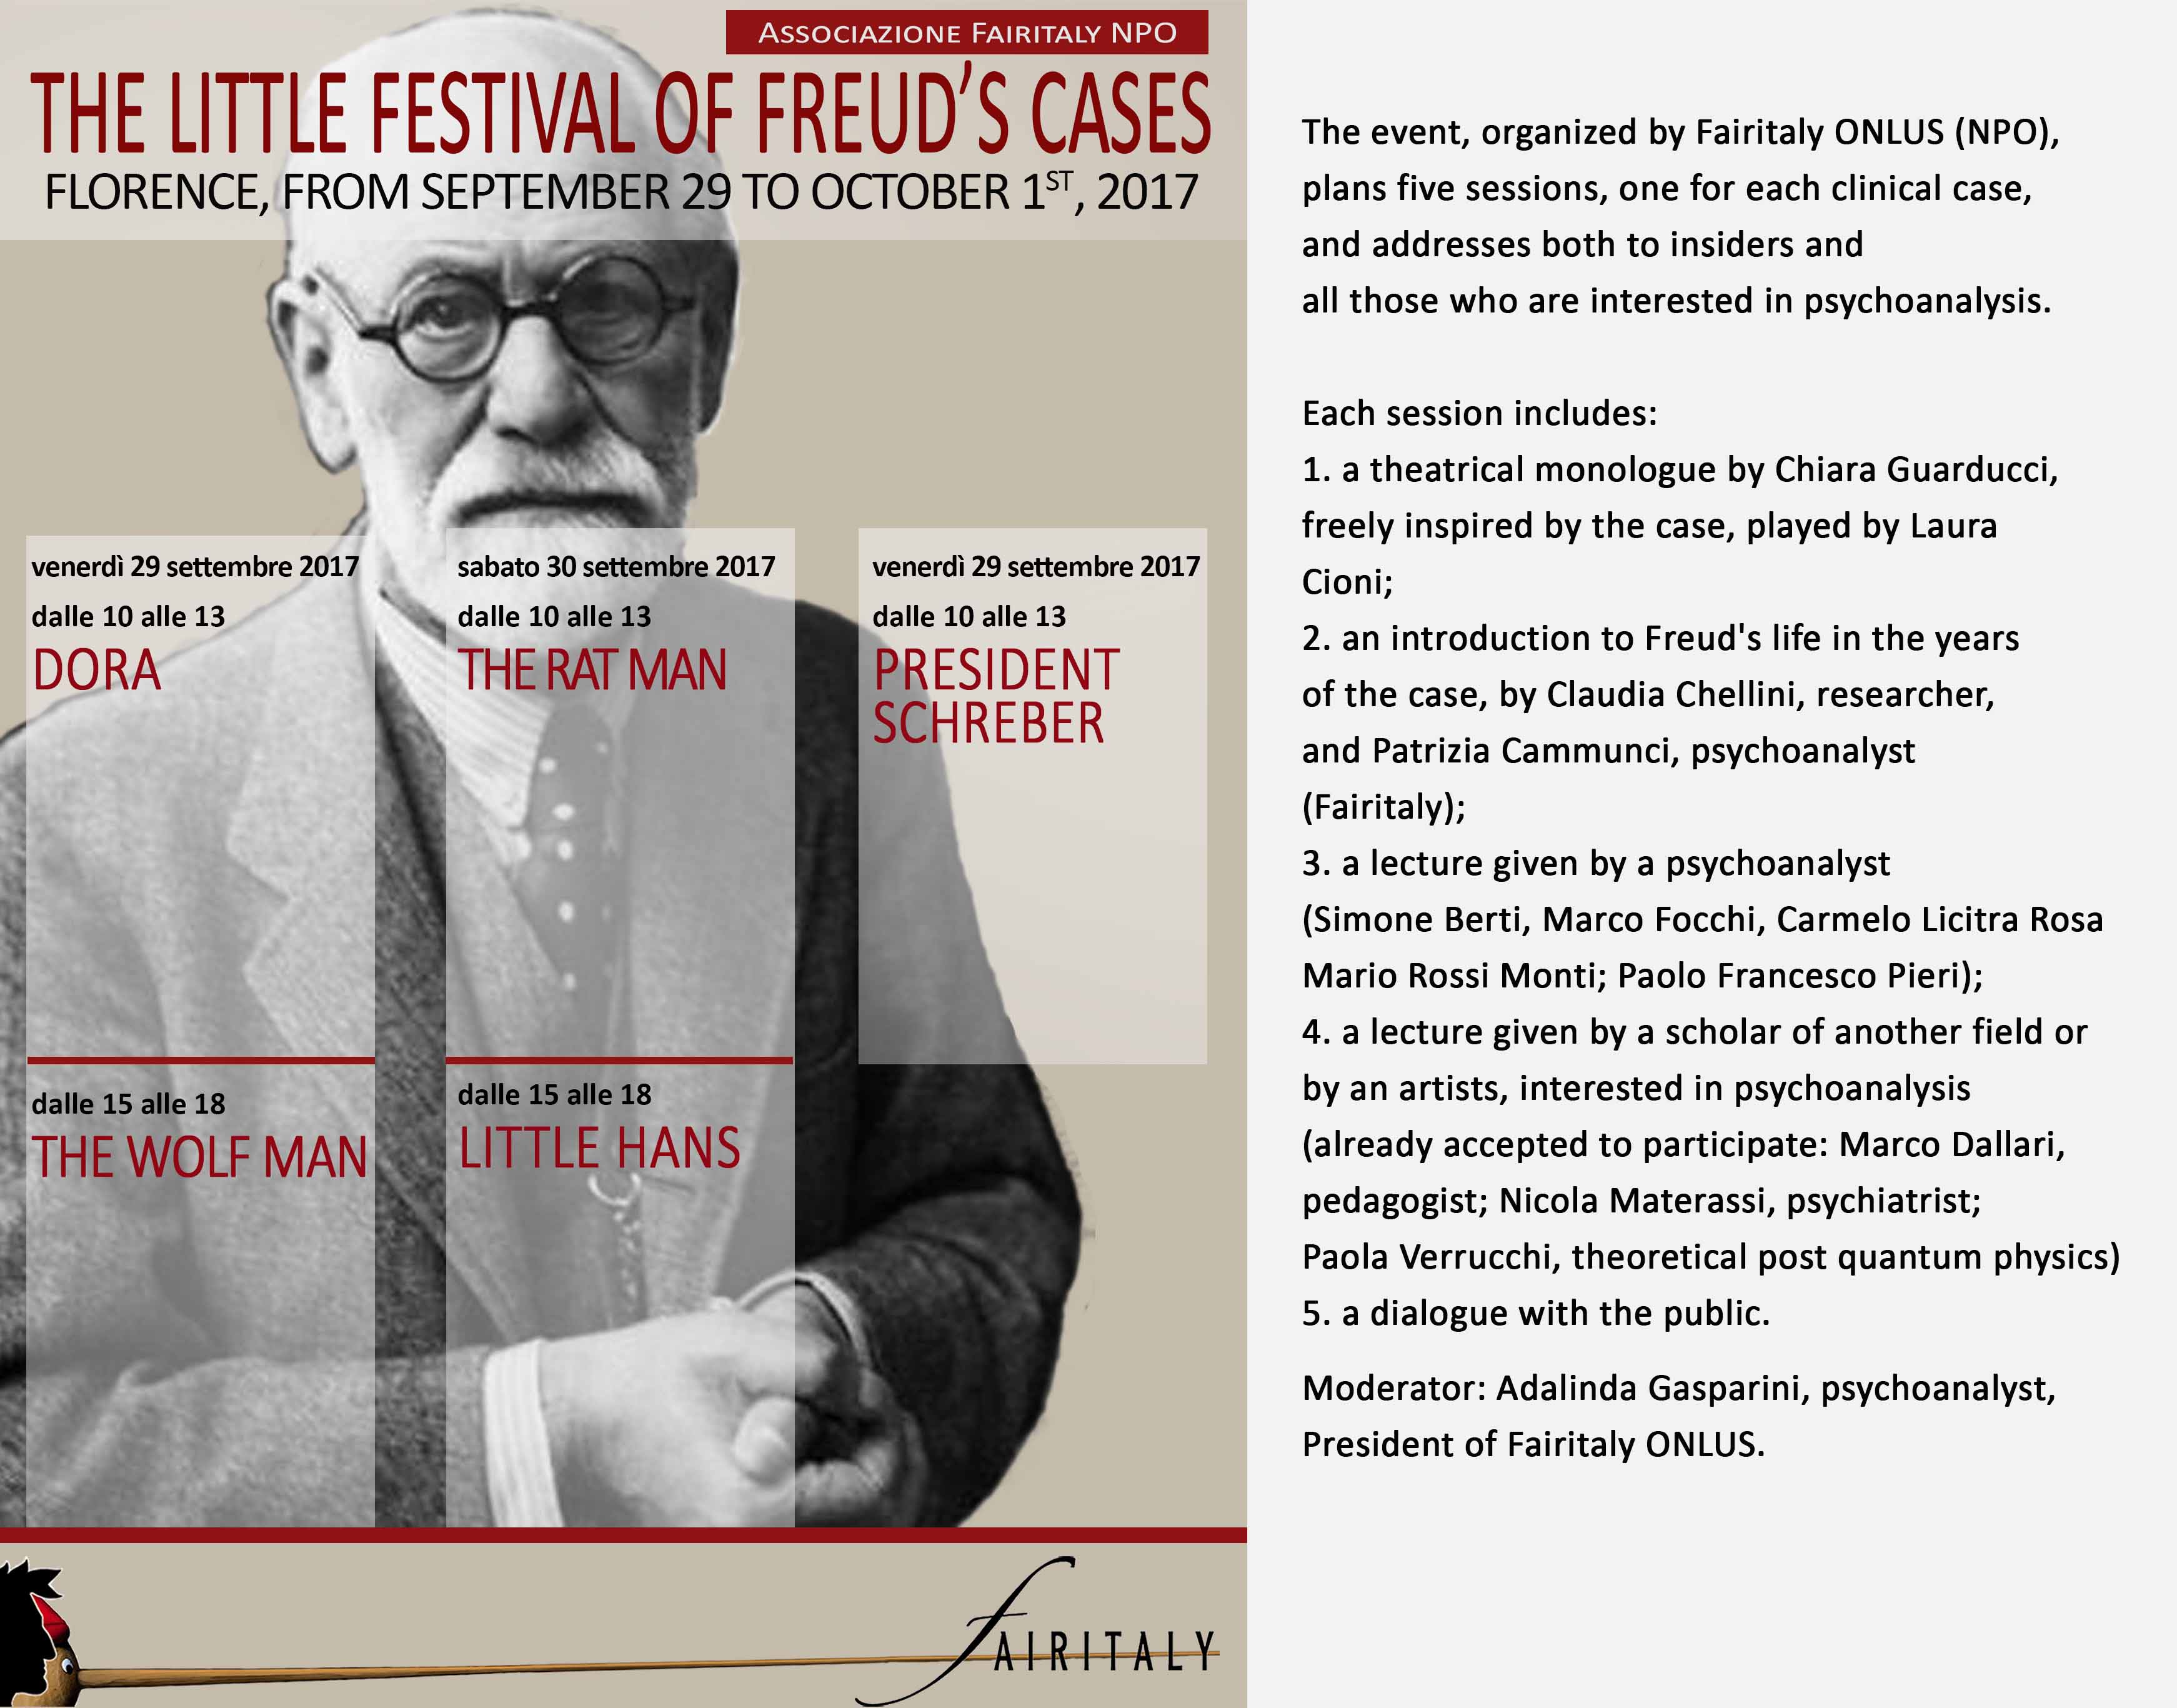 The Little Festival of Freud's Cases